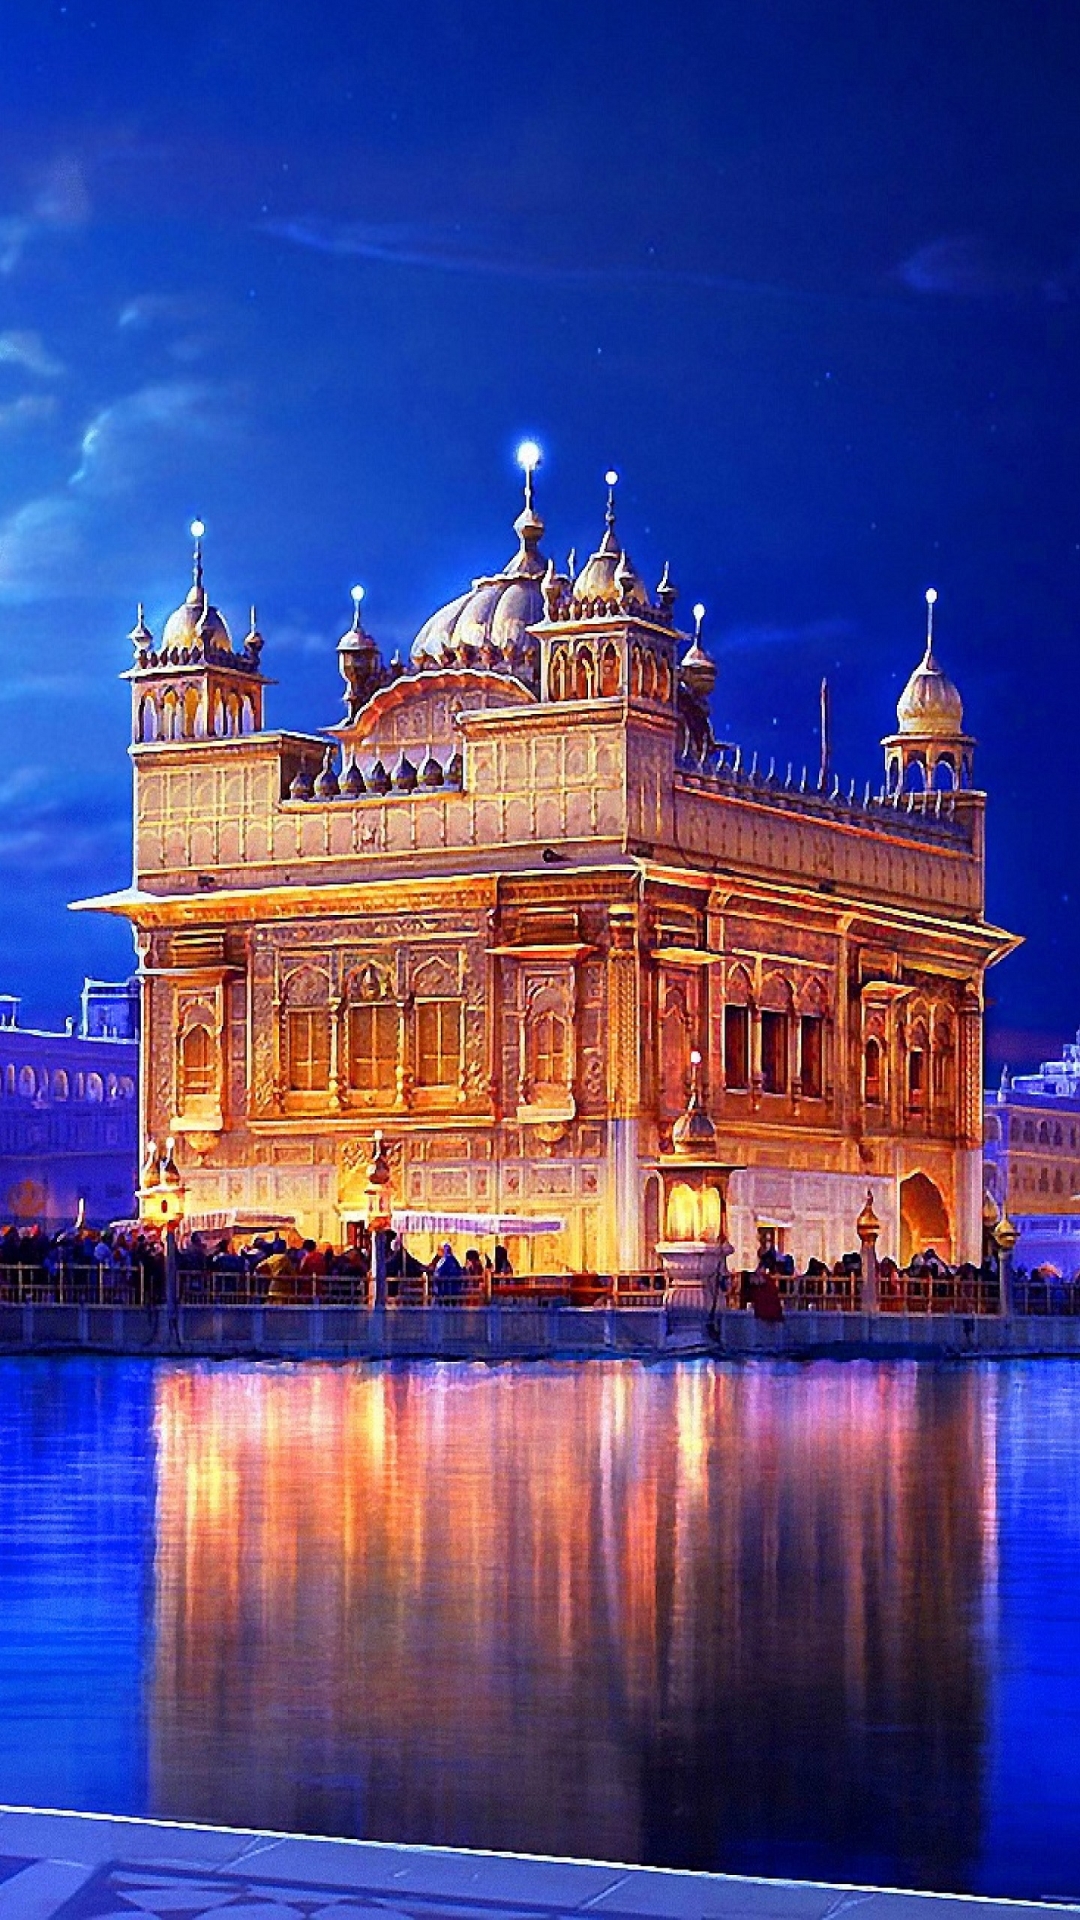 Golden Temple Amritsar India for Samsung A9 Pro & A7 resolution